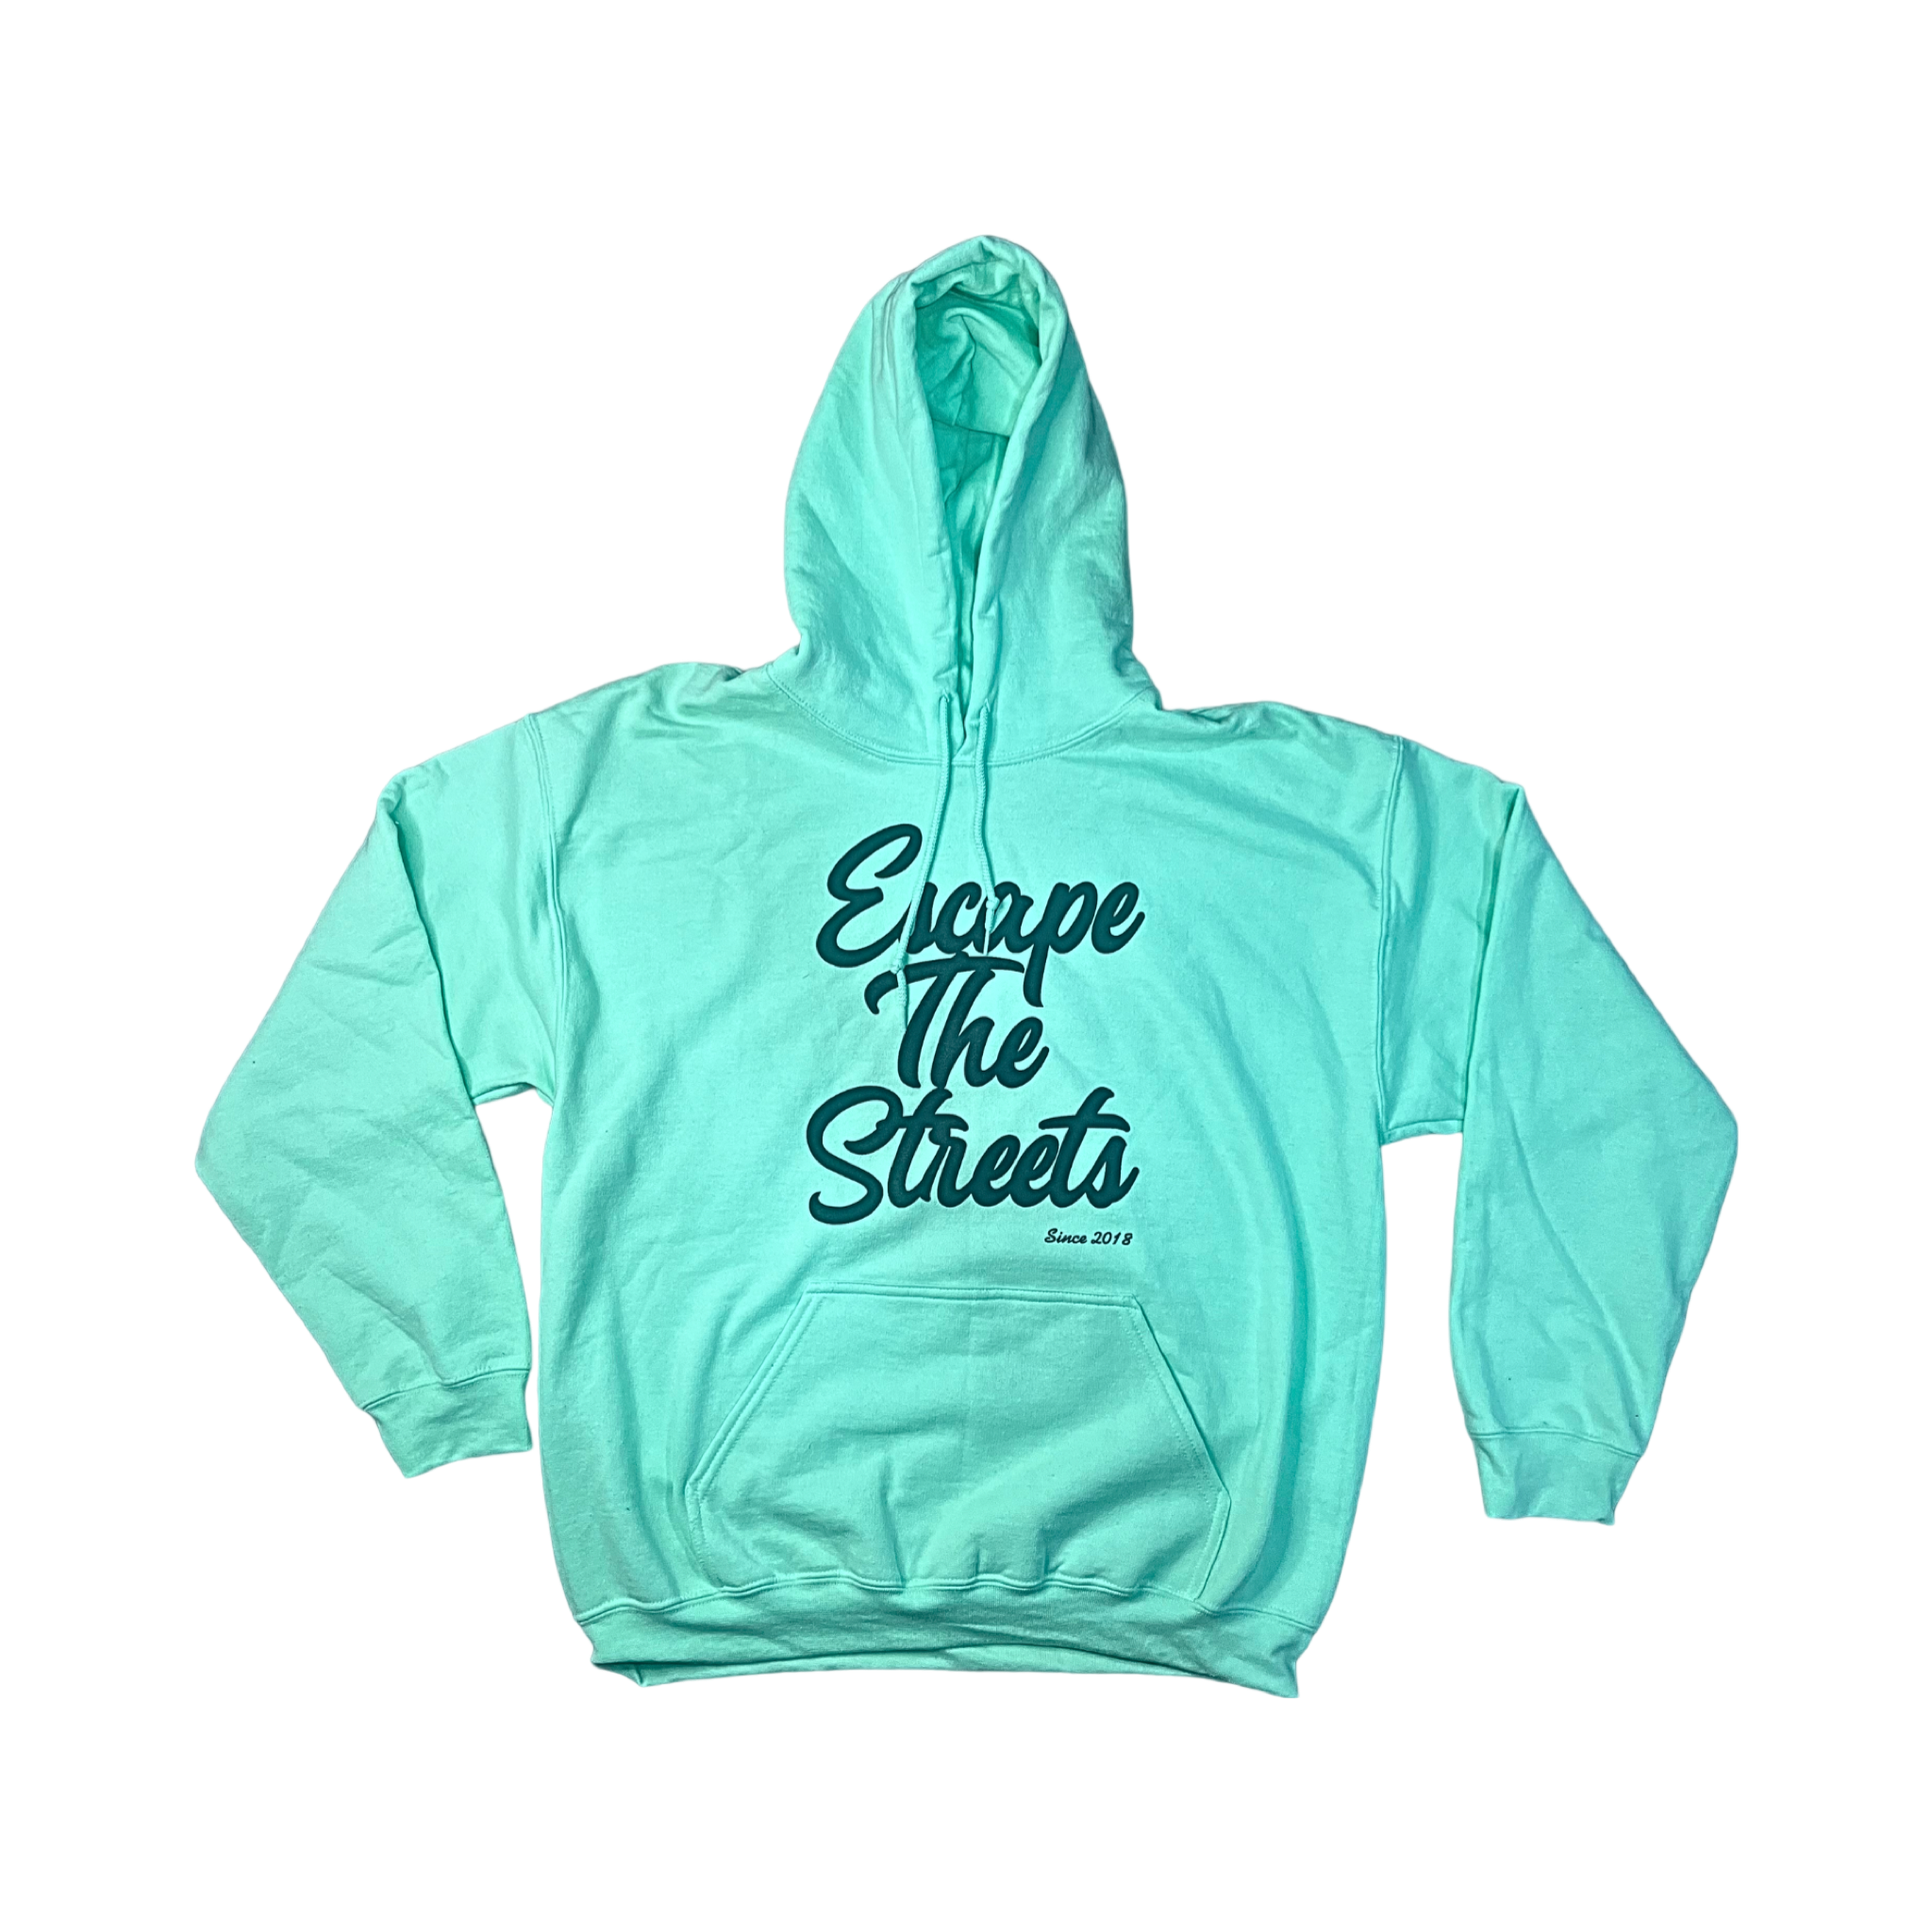 EscapeTheStreets Hoodie mint green